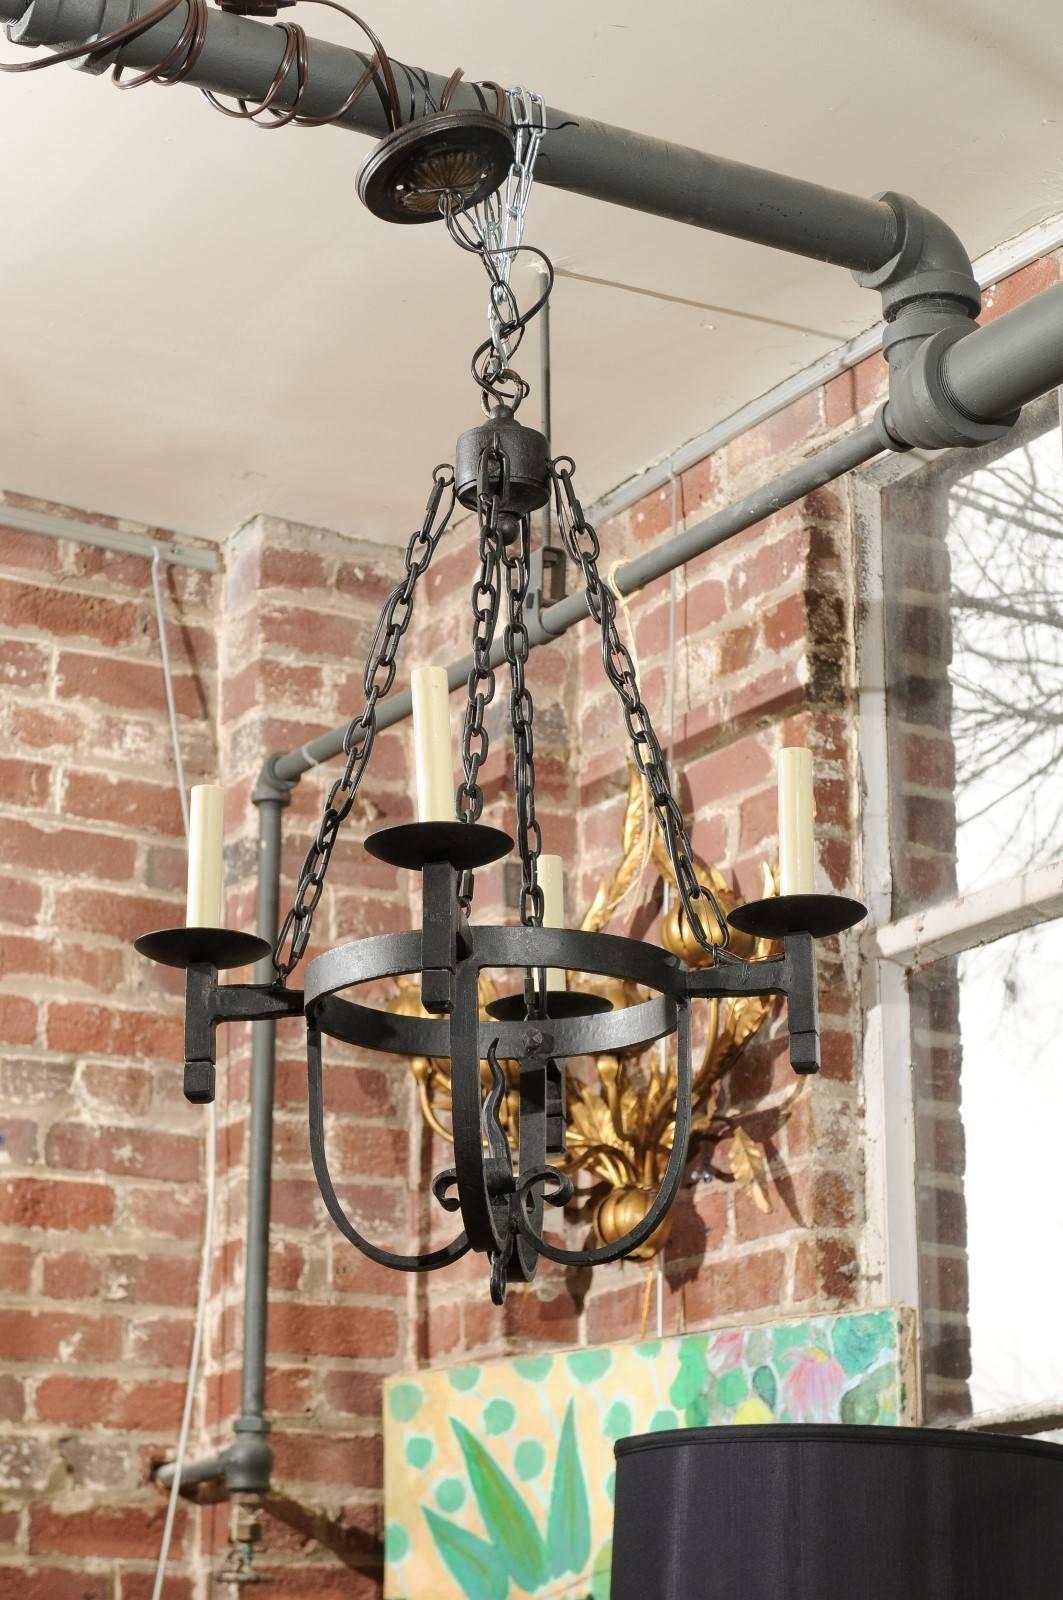 This 20th century chandelier is made of black iron in the Spanish or Mediterranean Mission style. It has a decorative ceiling plate holding a single chain that drops 9 inches to a small pendant. The pendant supports four chains that form a basket